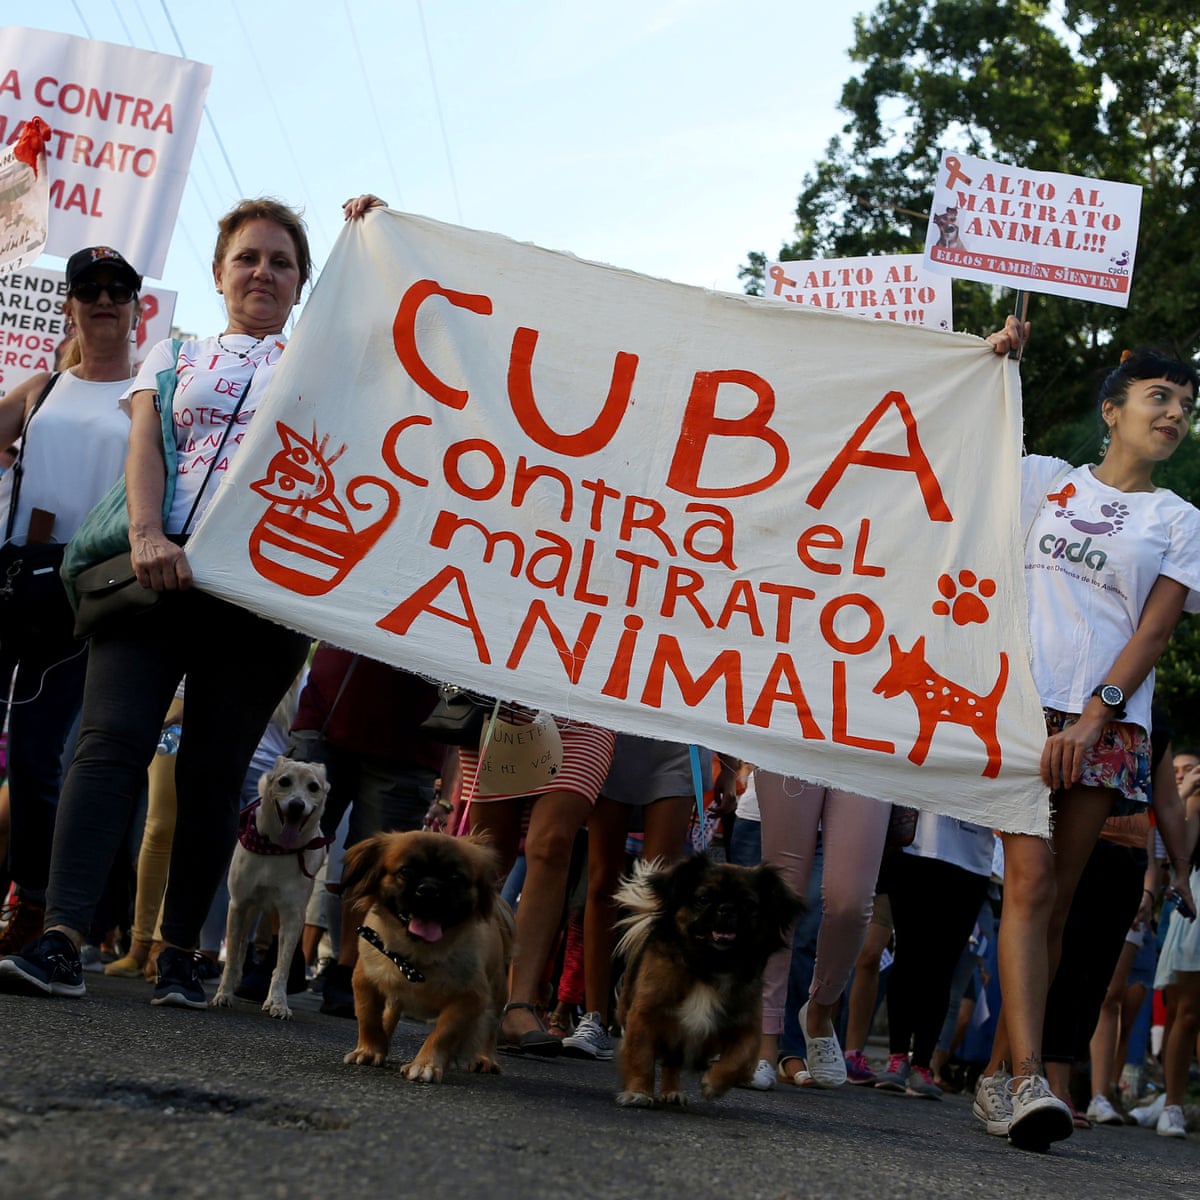 Hundreds of activists and pets march in Cuba against animal abuse | Cuba |  The Guardian